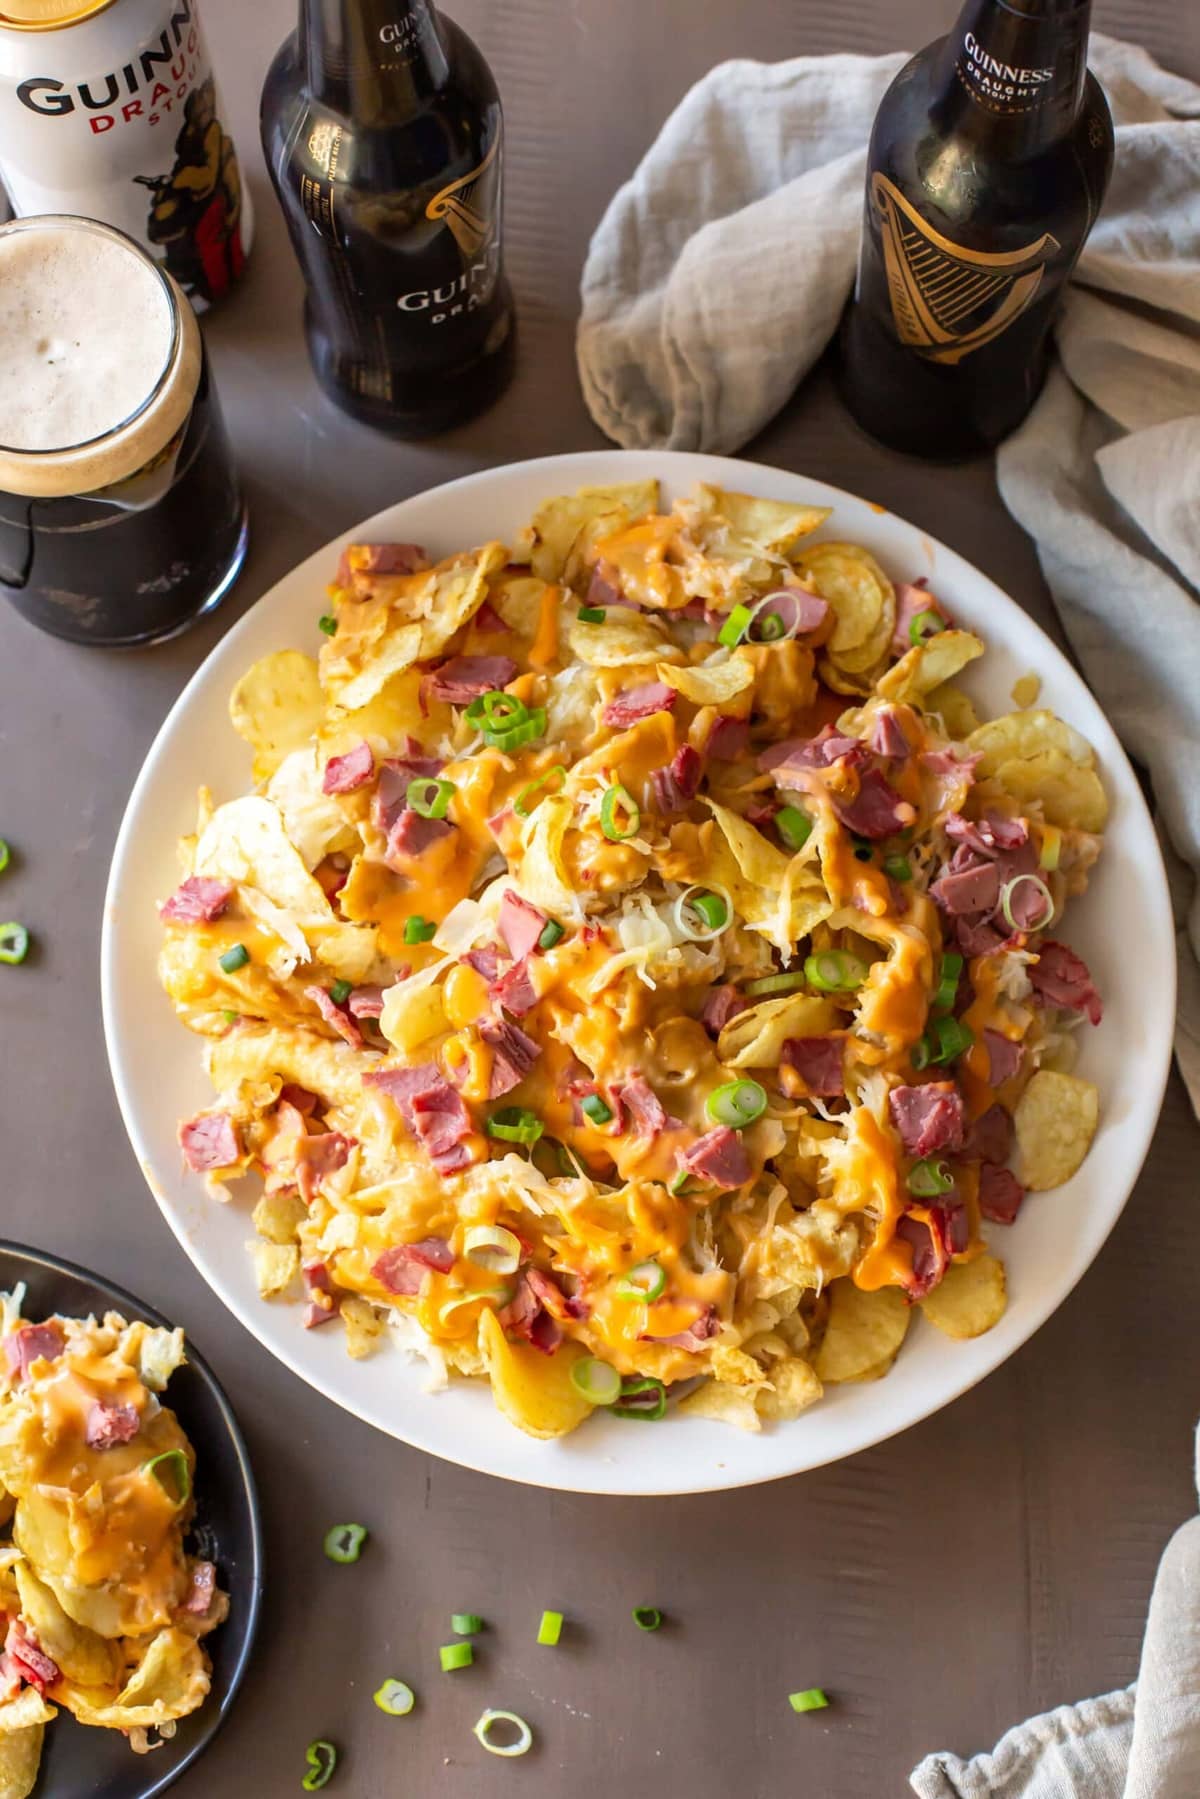 Irish Nachos covered in cheese, sauerkraut, corned beef, and beer cheese sauce, served with Guinness beer.